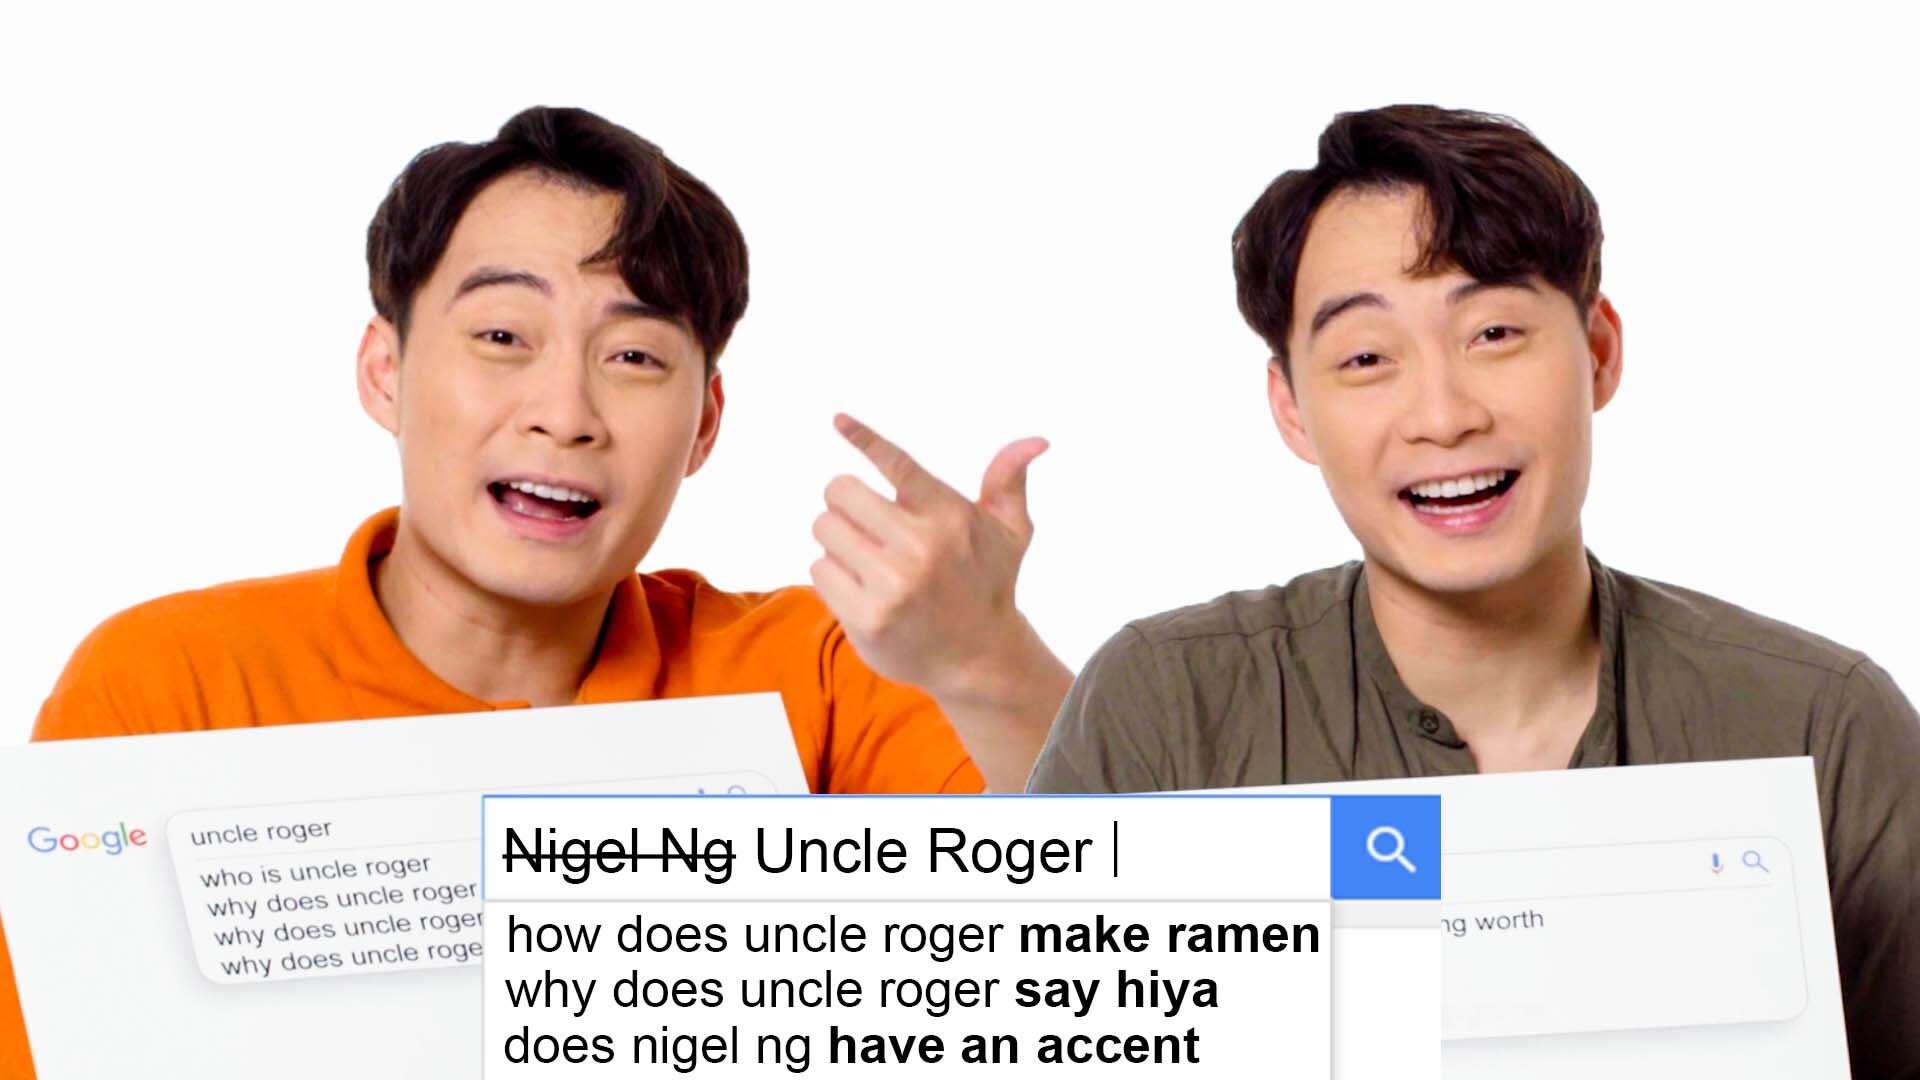 Uncle Roger want to know: Do you have rice cooker? If no why you